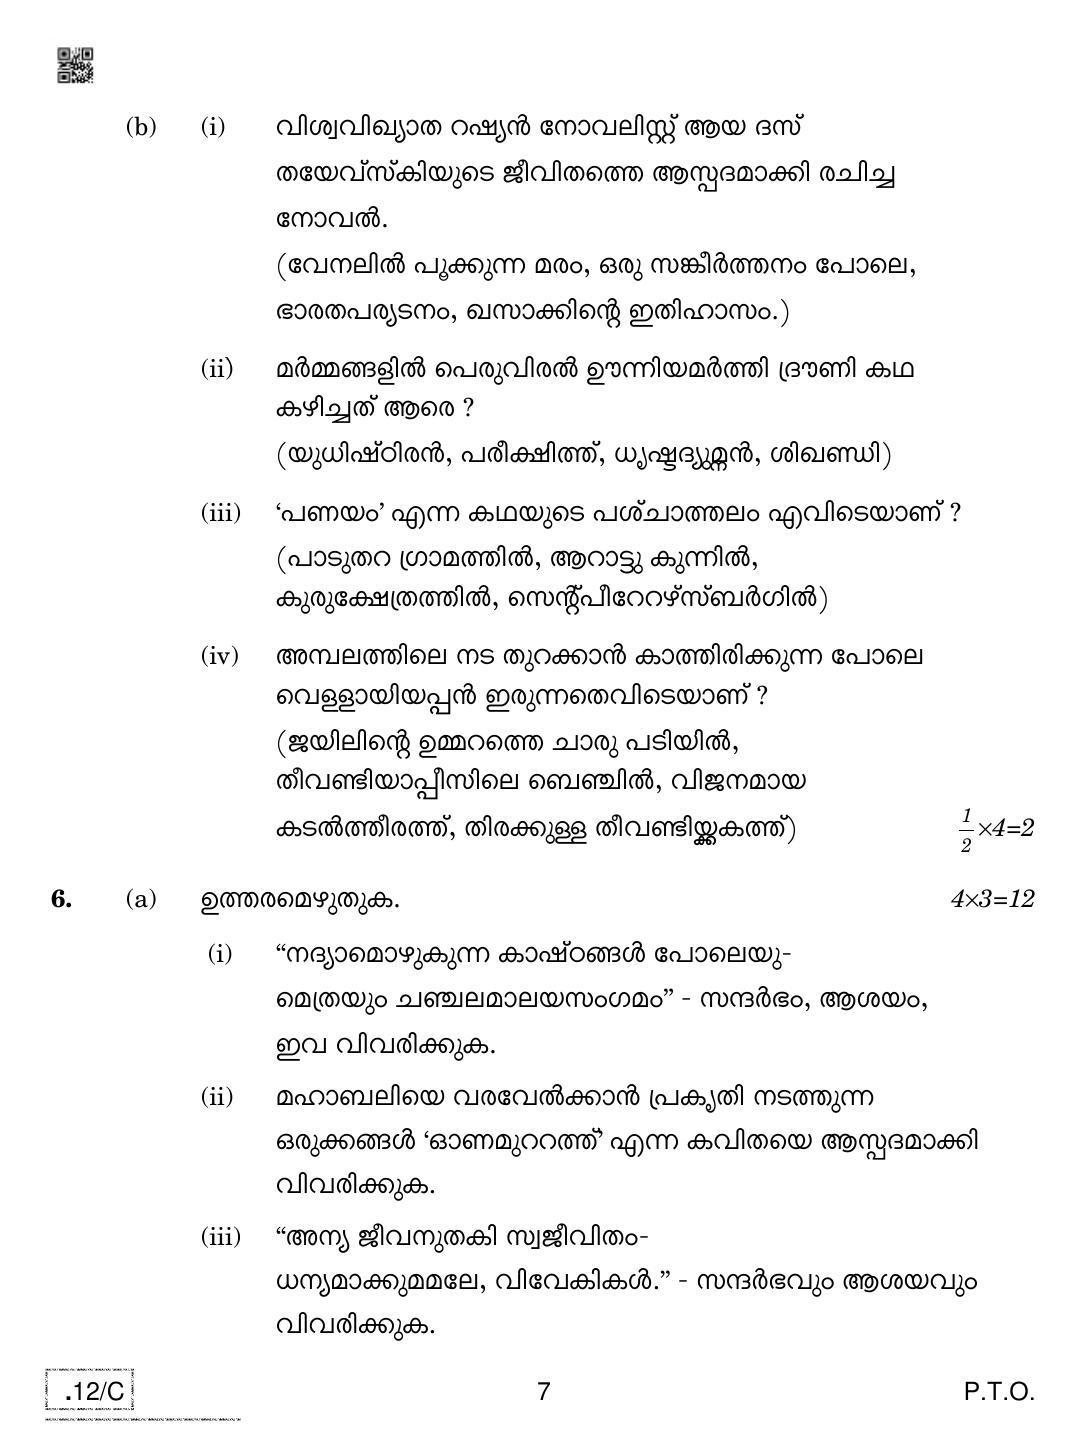 CBSE Class 10 Malayalam 2020 Compartment Question Paper - Page 7